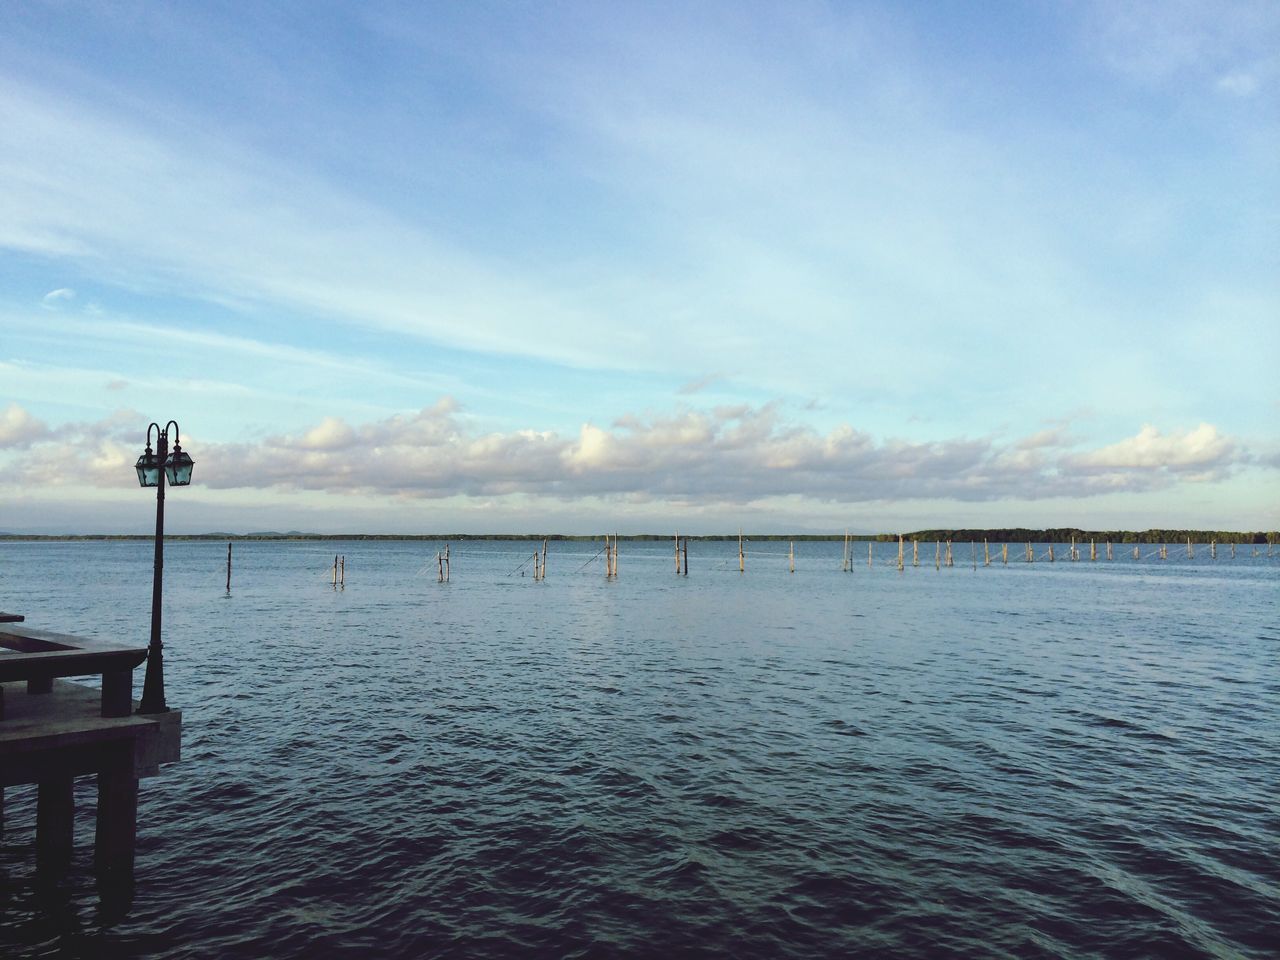 sea, water, sky, tranquil scene, tranquility, horizon over water, scenics, beauty in nature, nature, cloud - sky, cloud, idyllic, rippled, waterfront, calm, pier, outdoors, street light, remote, blue